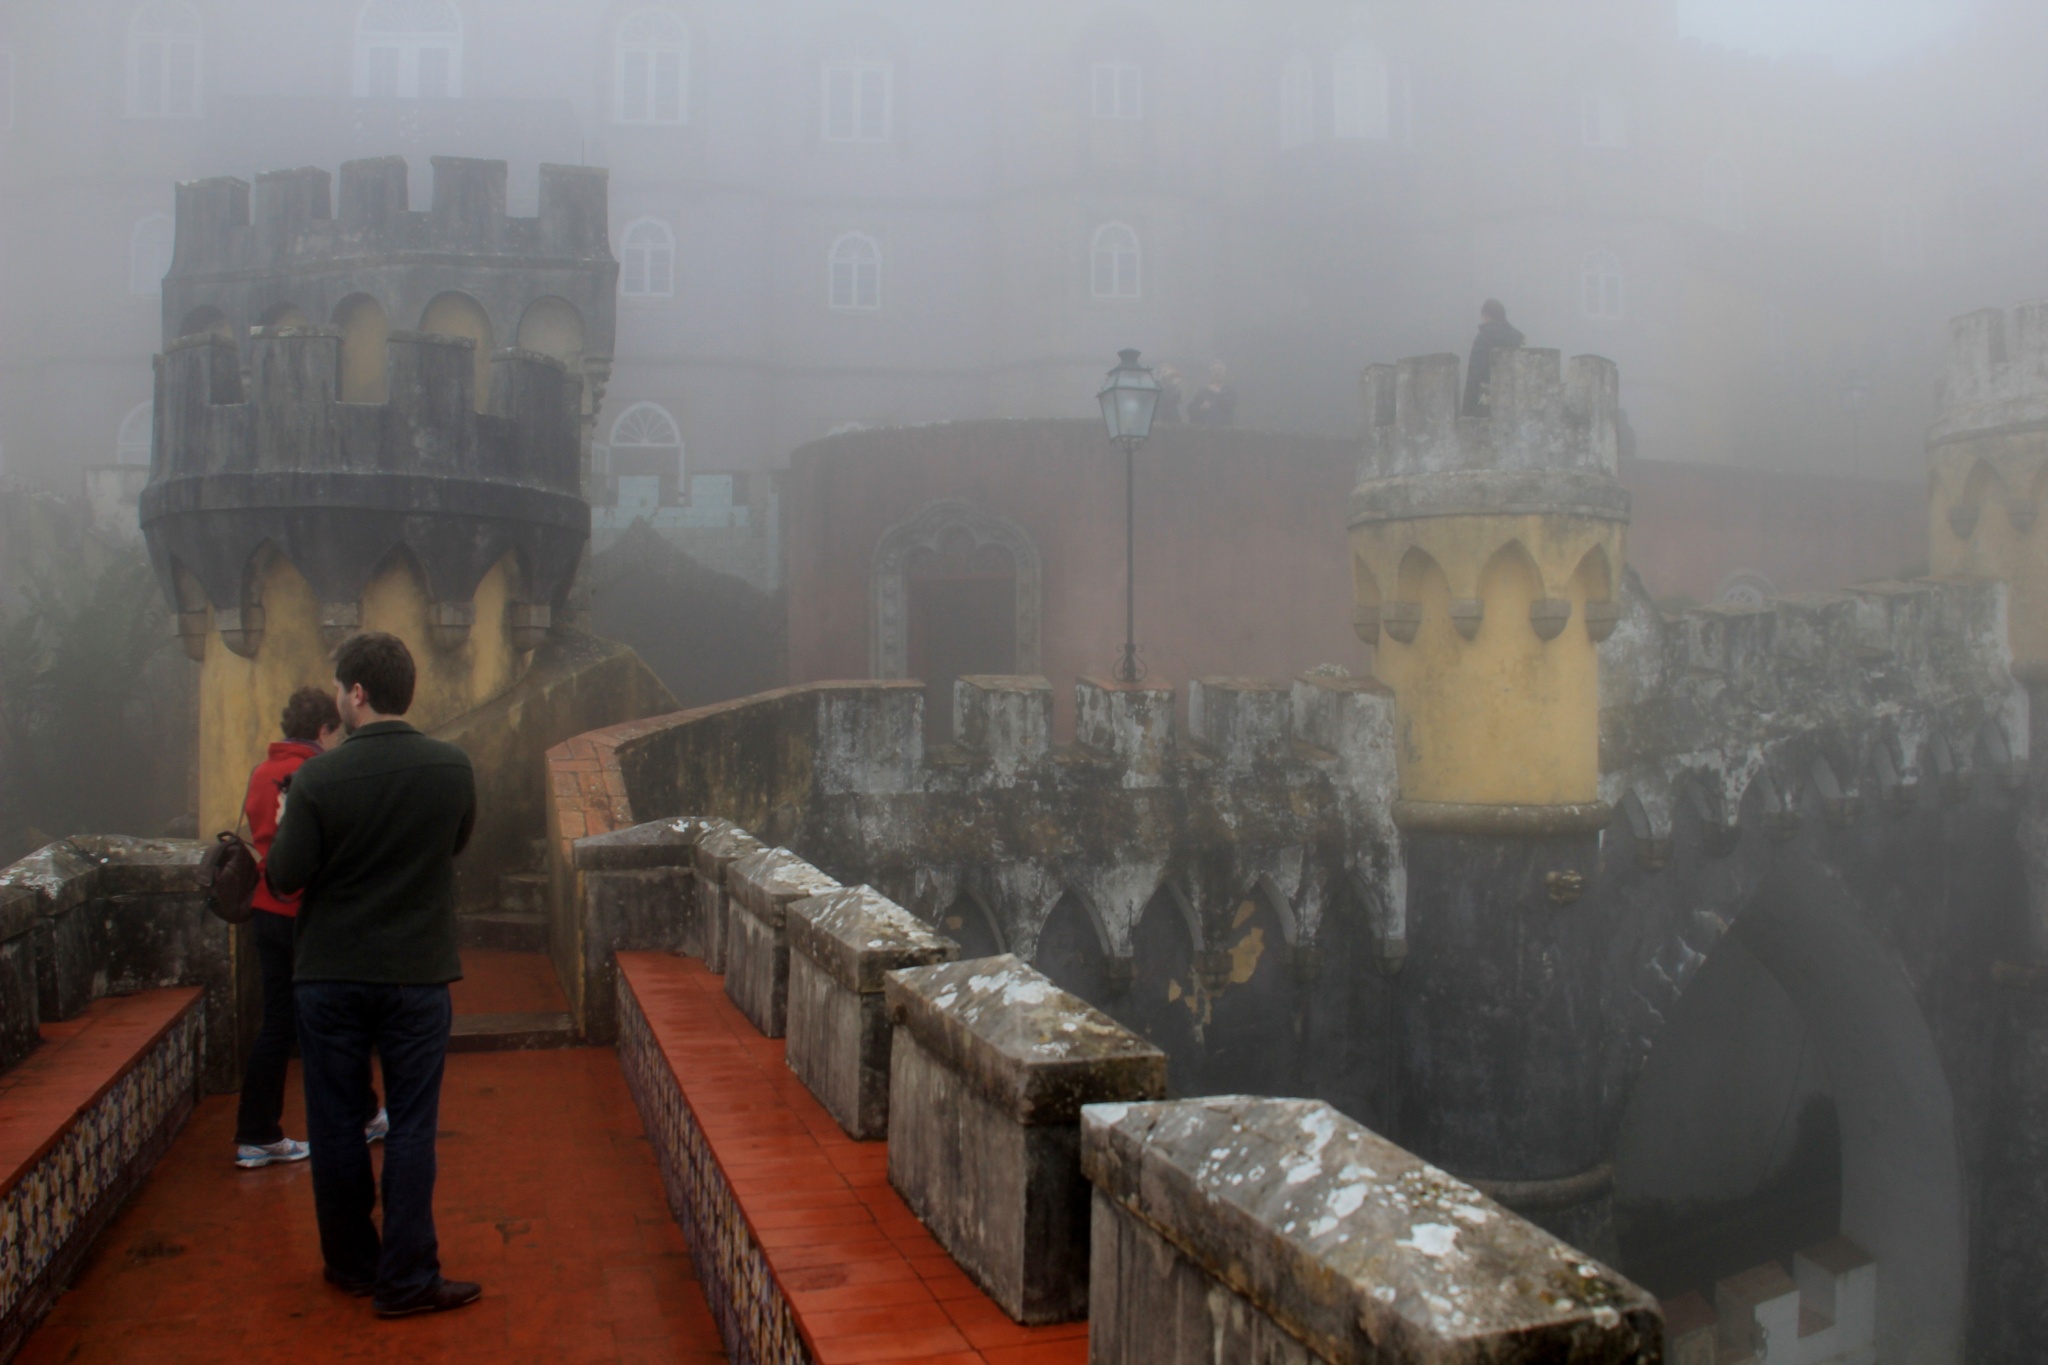 Tourists visit a fog-enveloped Pena National Palace in Sintra, Portugal.